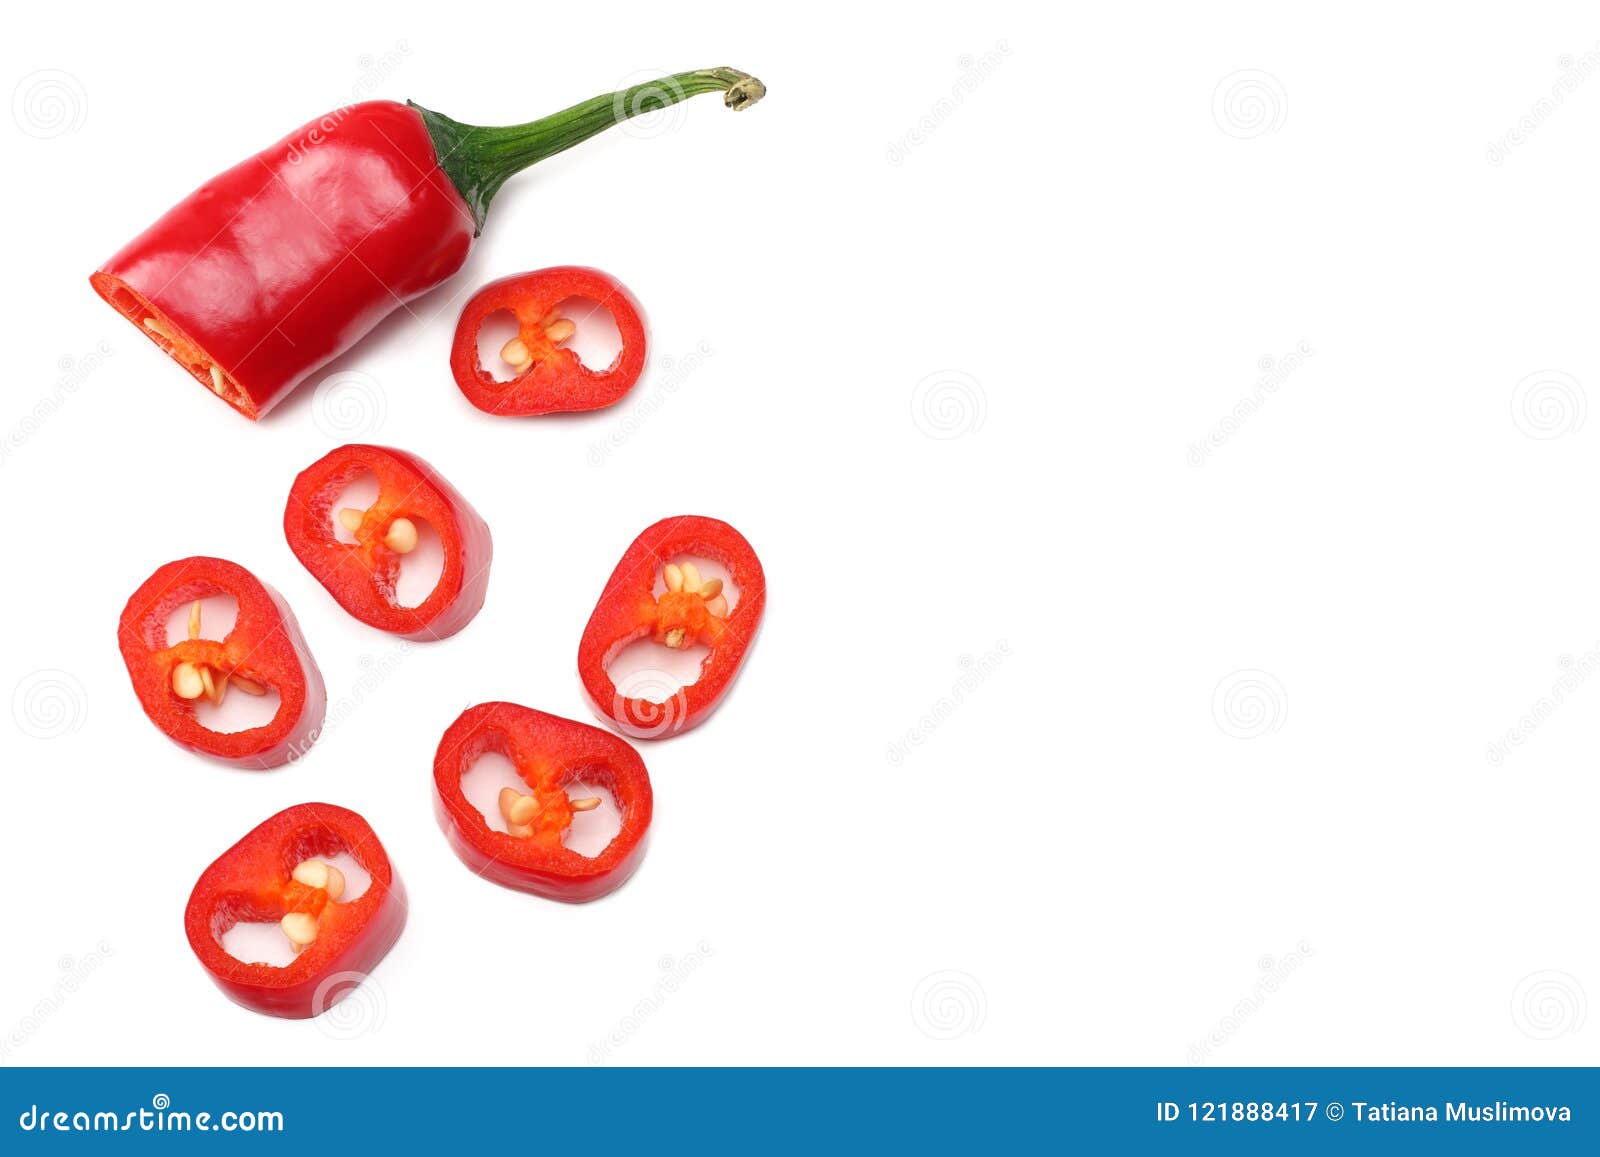 Sliced Red Chili Peppers Background Top View Stock Image - Image of object, organic: 121888417